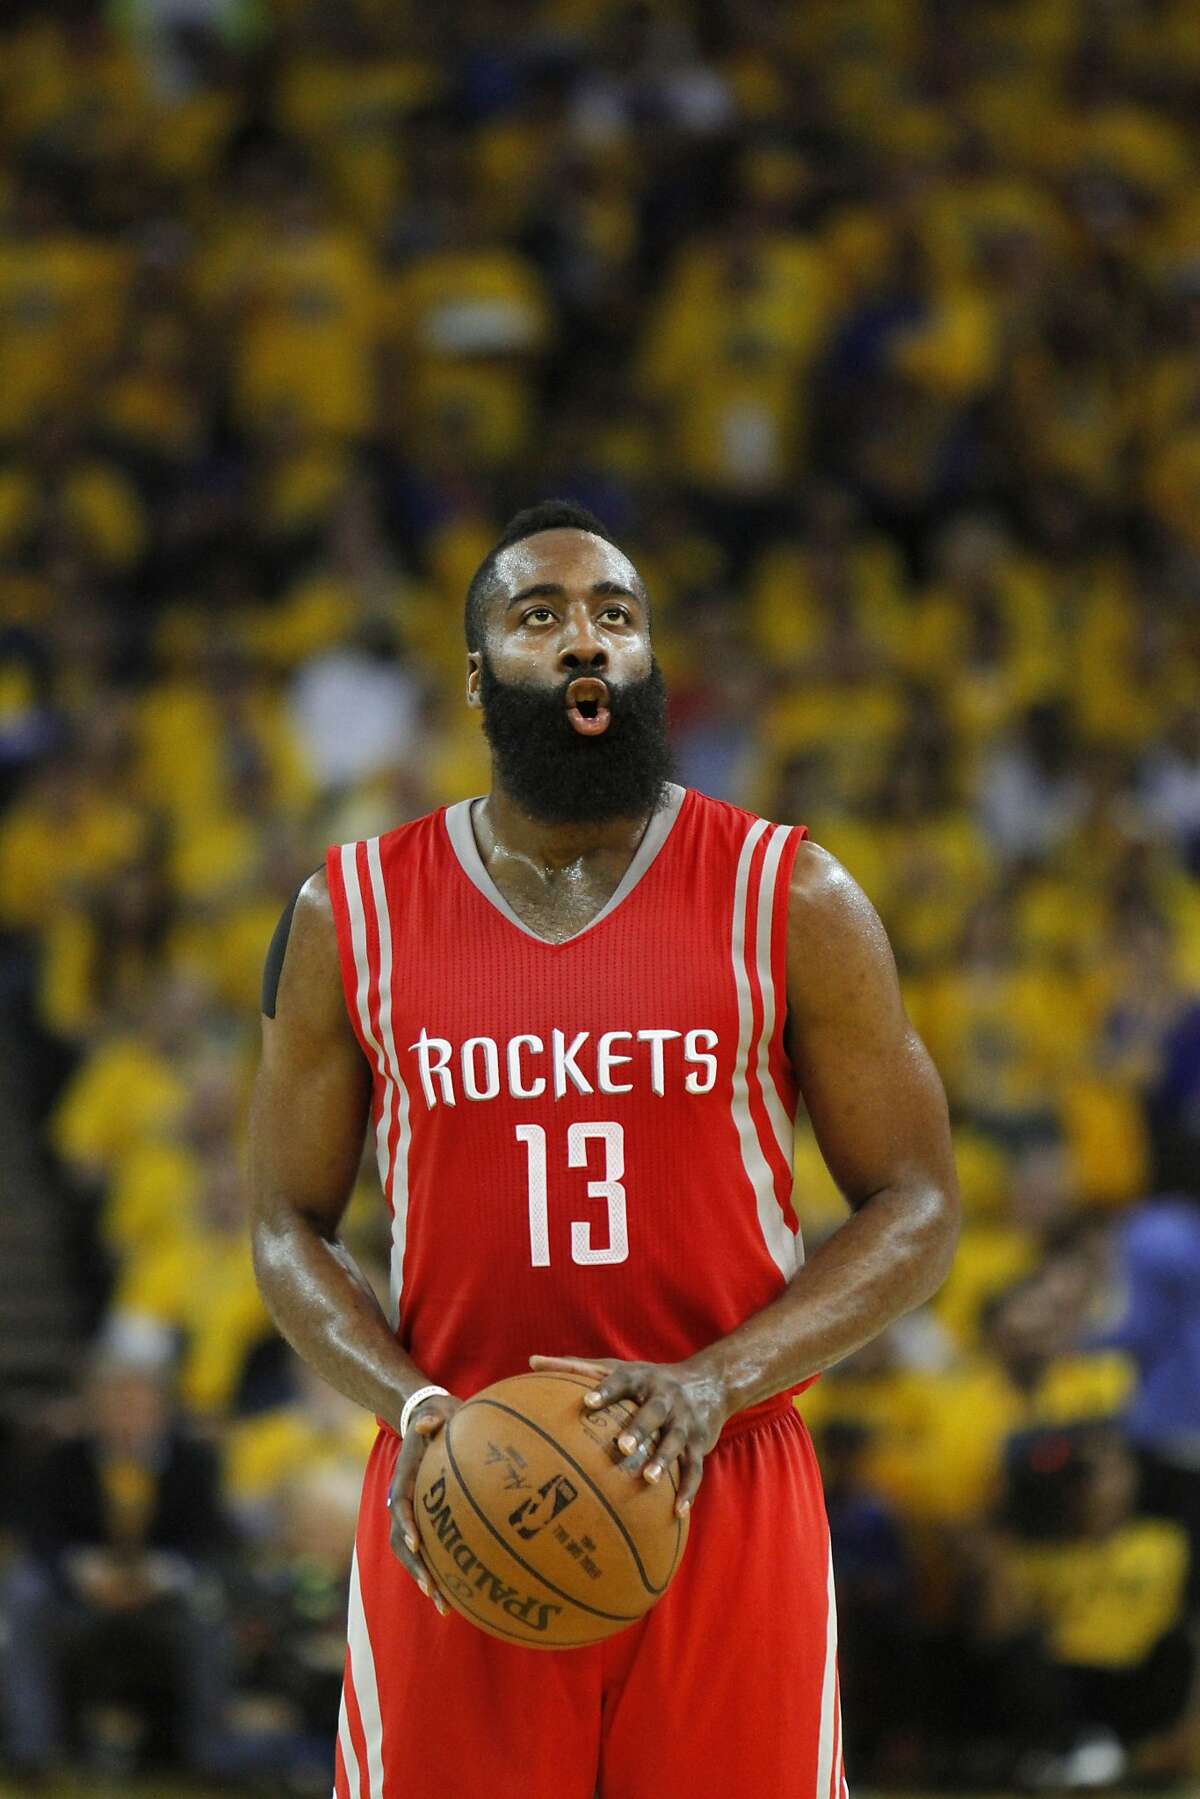 James Harden prepares for a free throw in the first quarter of game 5 on Wednesday, May 27, 2015 in Oakland, Calif.